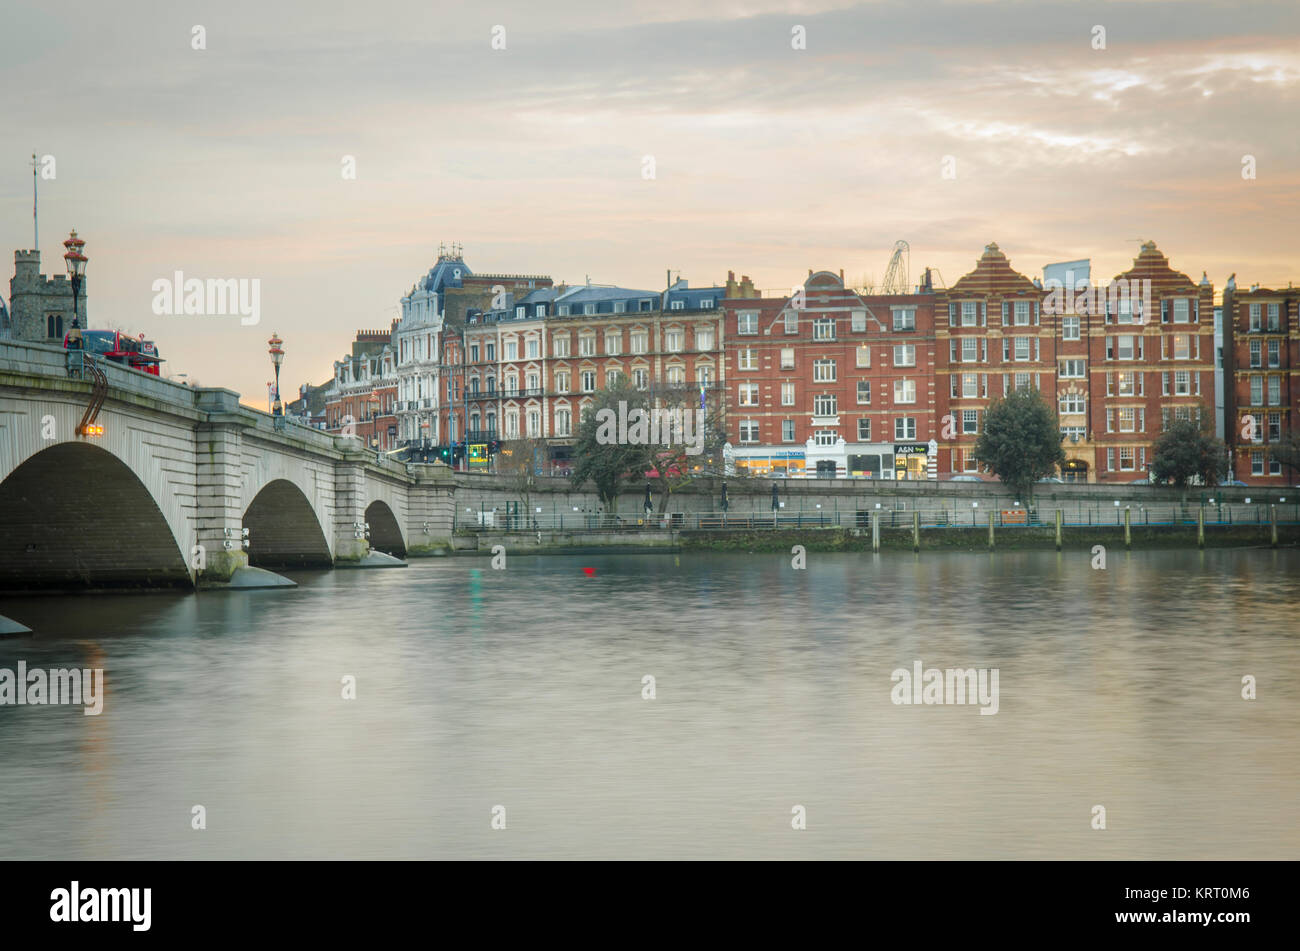 Putney Bridge in south west London linking Putney and Fulham Stock Photo